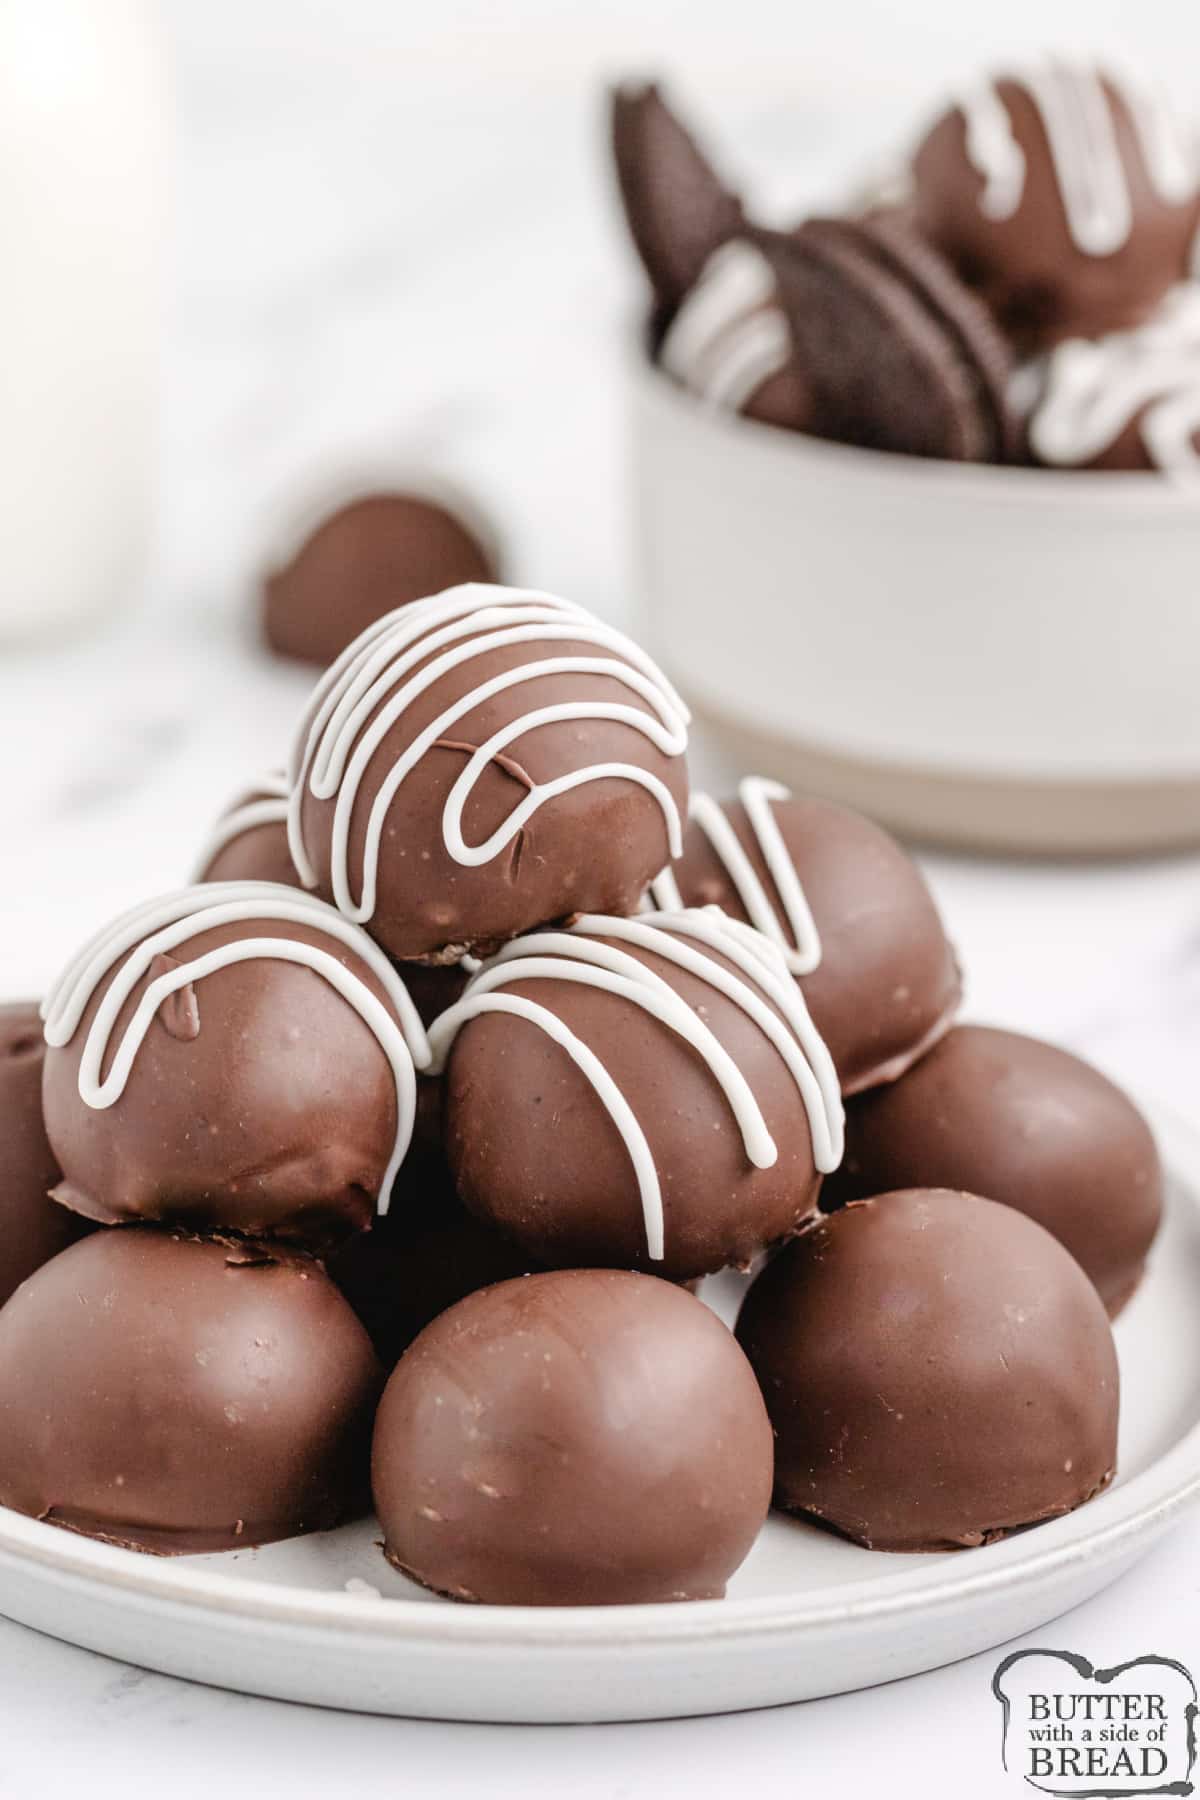 Peanut Butter Oreo Balls made with just 4 ingredients for the perfect no bake dessert! Delicious, bite-sized treats that are so easy to make!